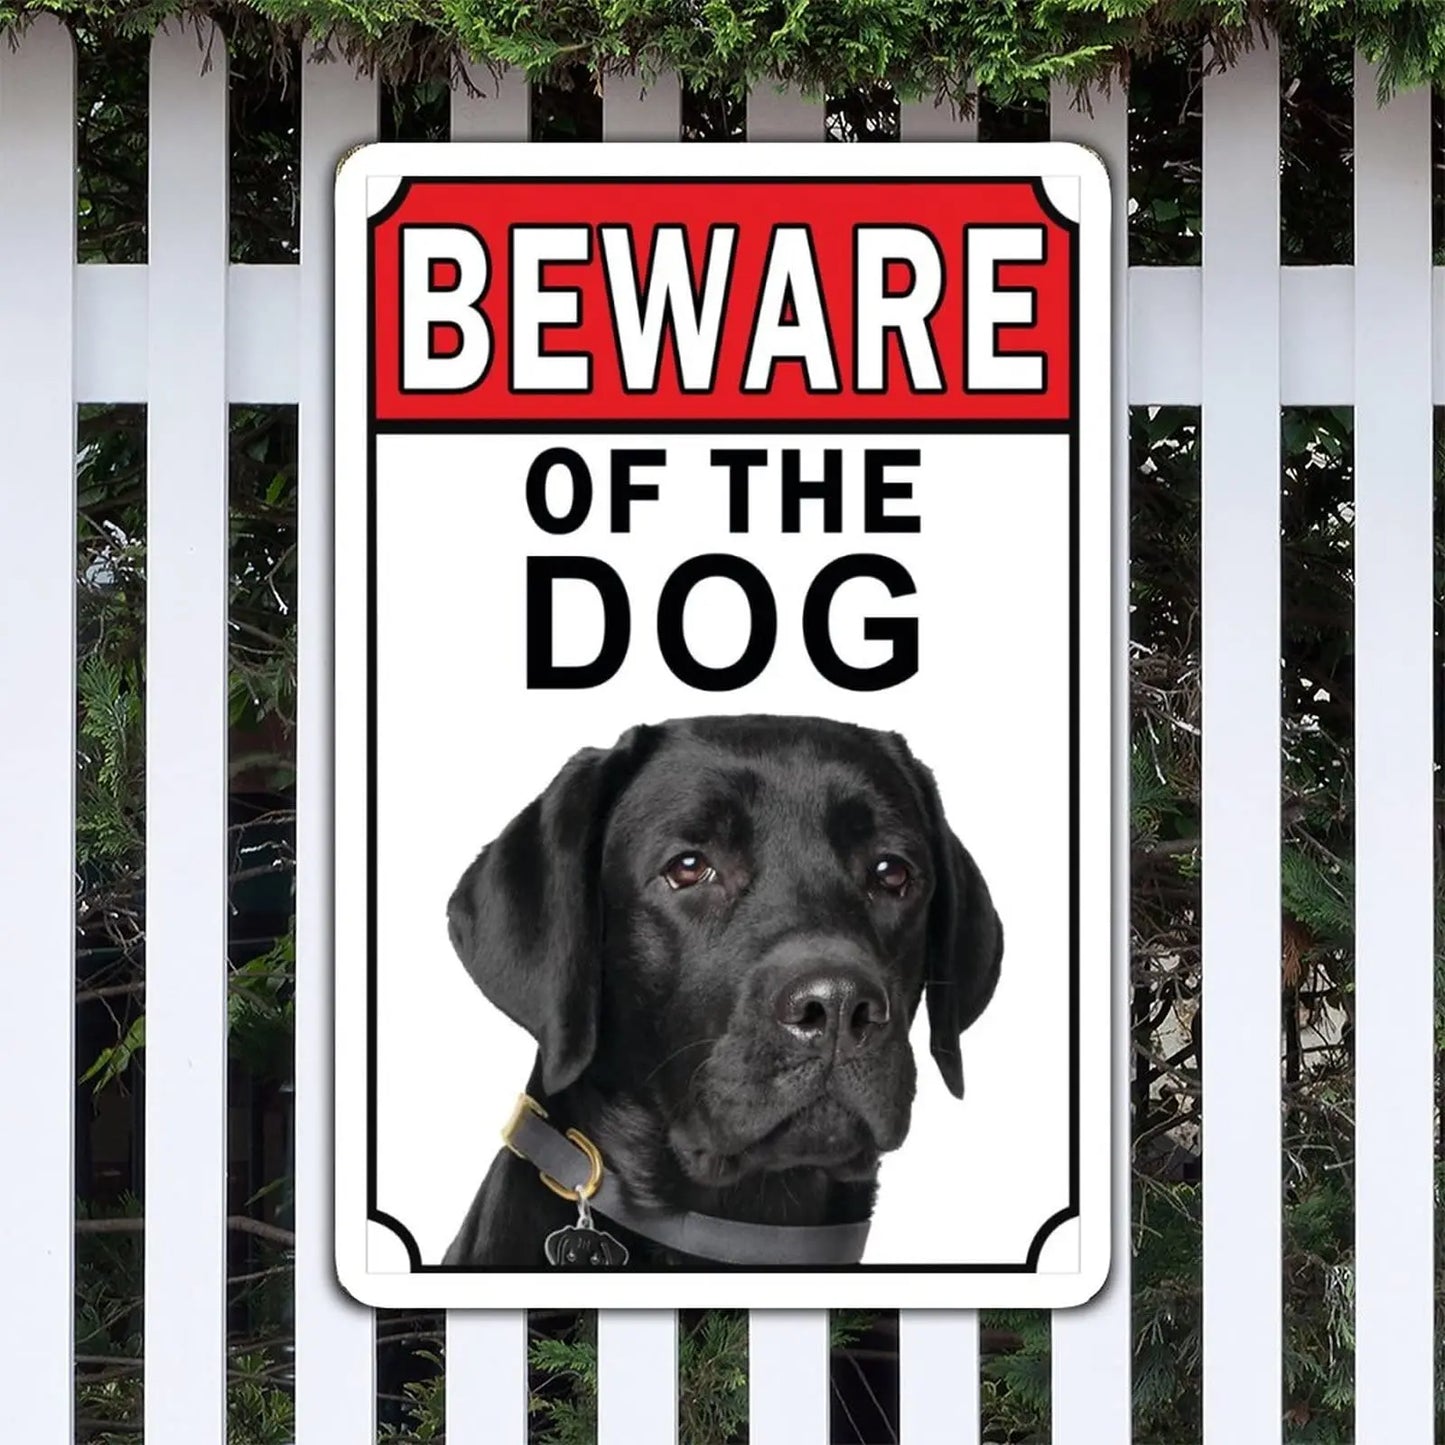 NoneQeleve Beware of The Dog Aluminum Metal Sign Black Labrador Metal Tin Sign 12x18 inch Business Security Sign Home Wall Decor